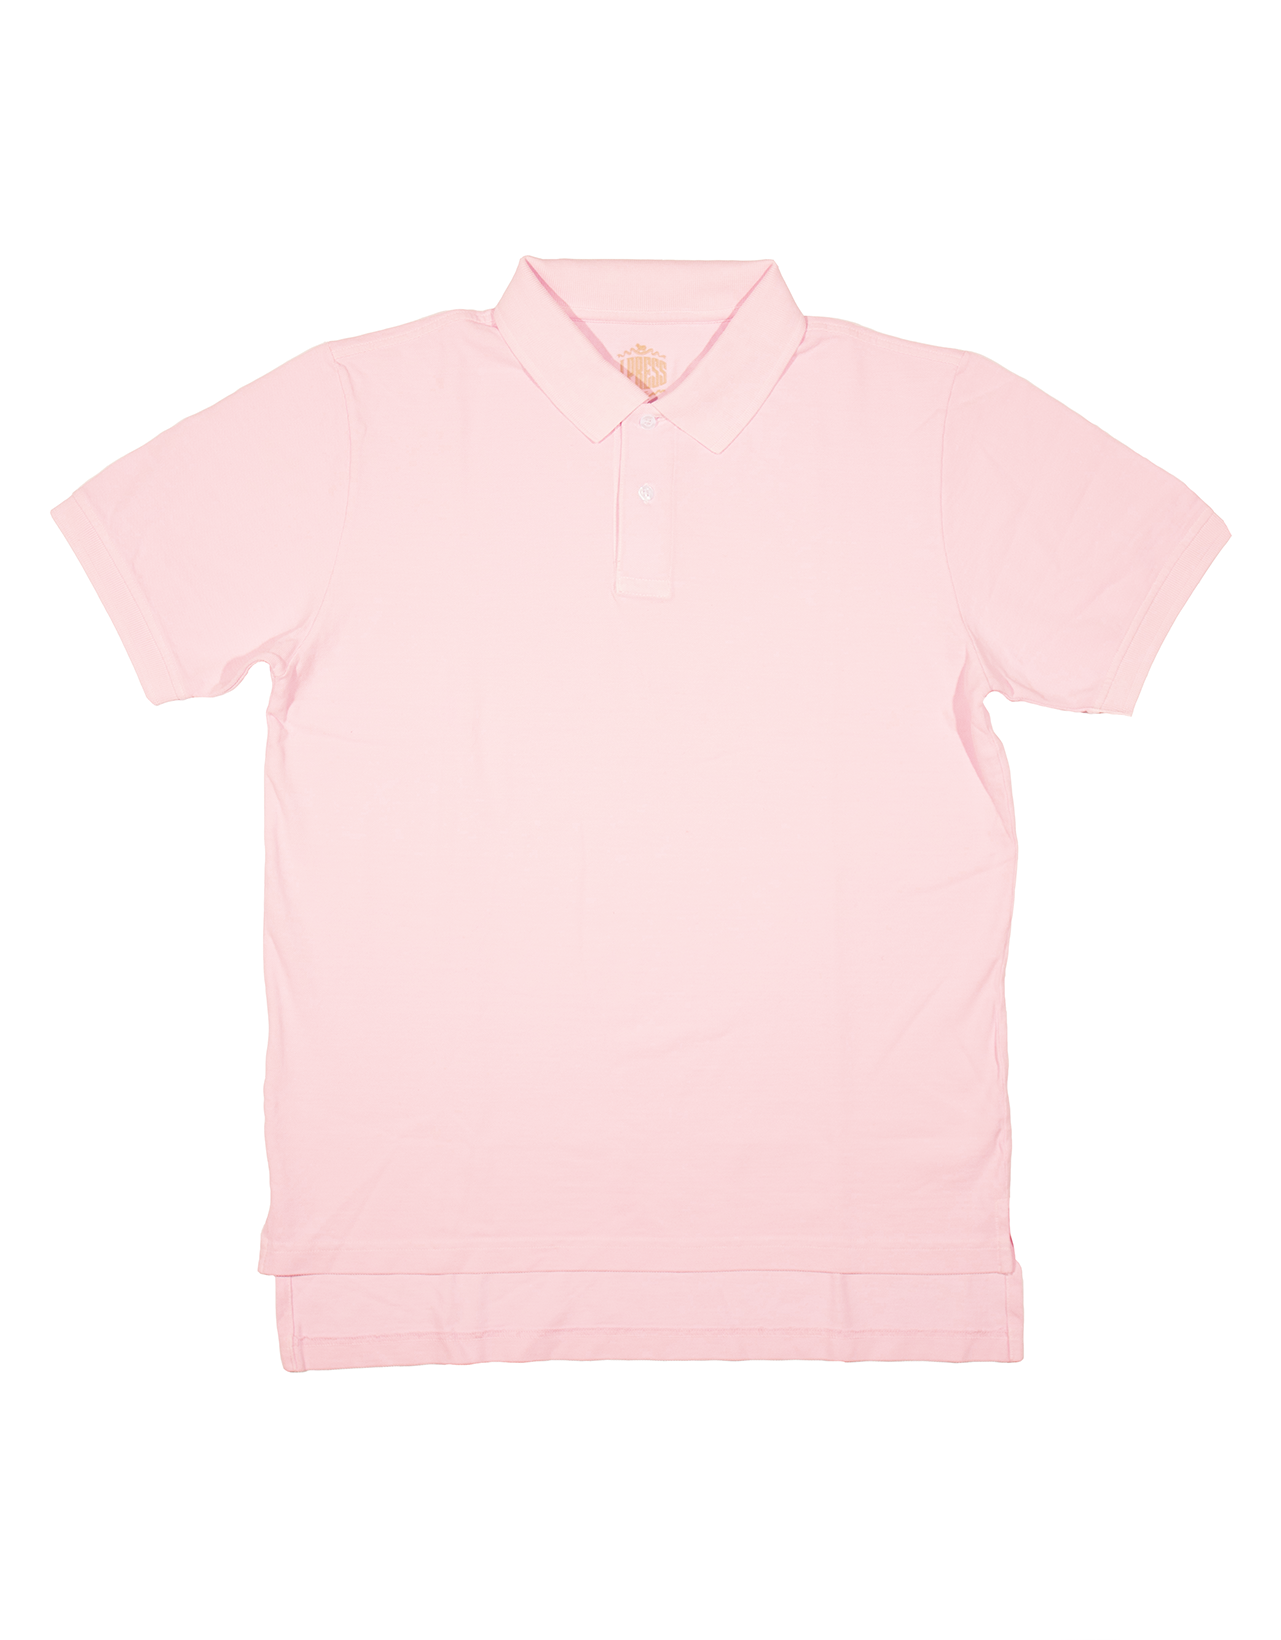 SOLID PIQUE POLO - PINK